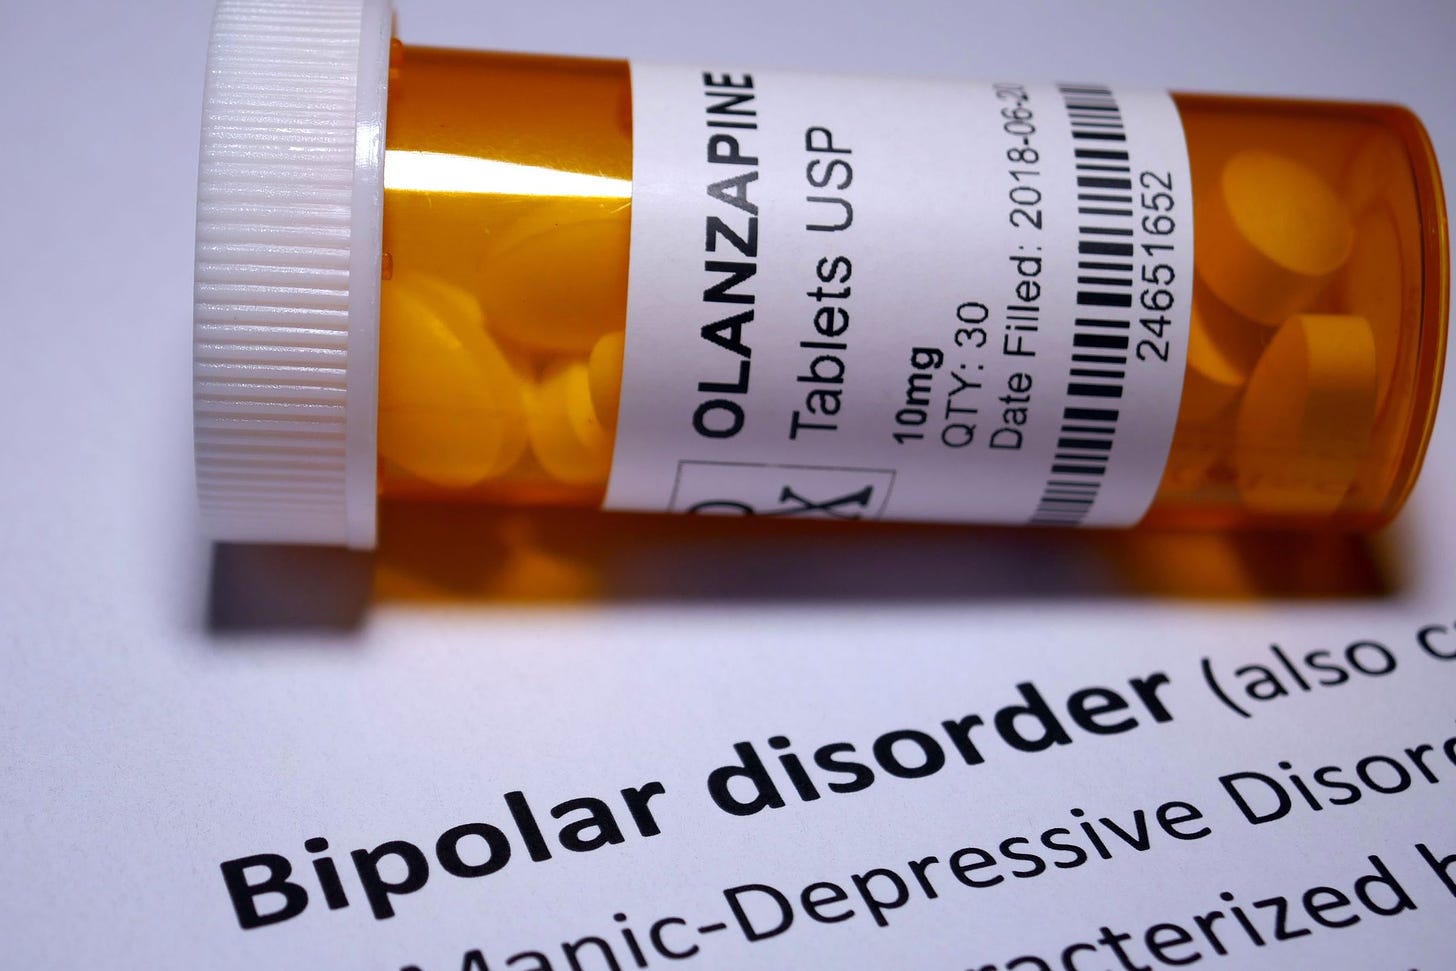 Olanzapine (Zyprexa): uses, dosage, side effects and brand information